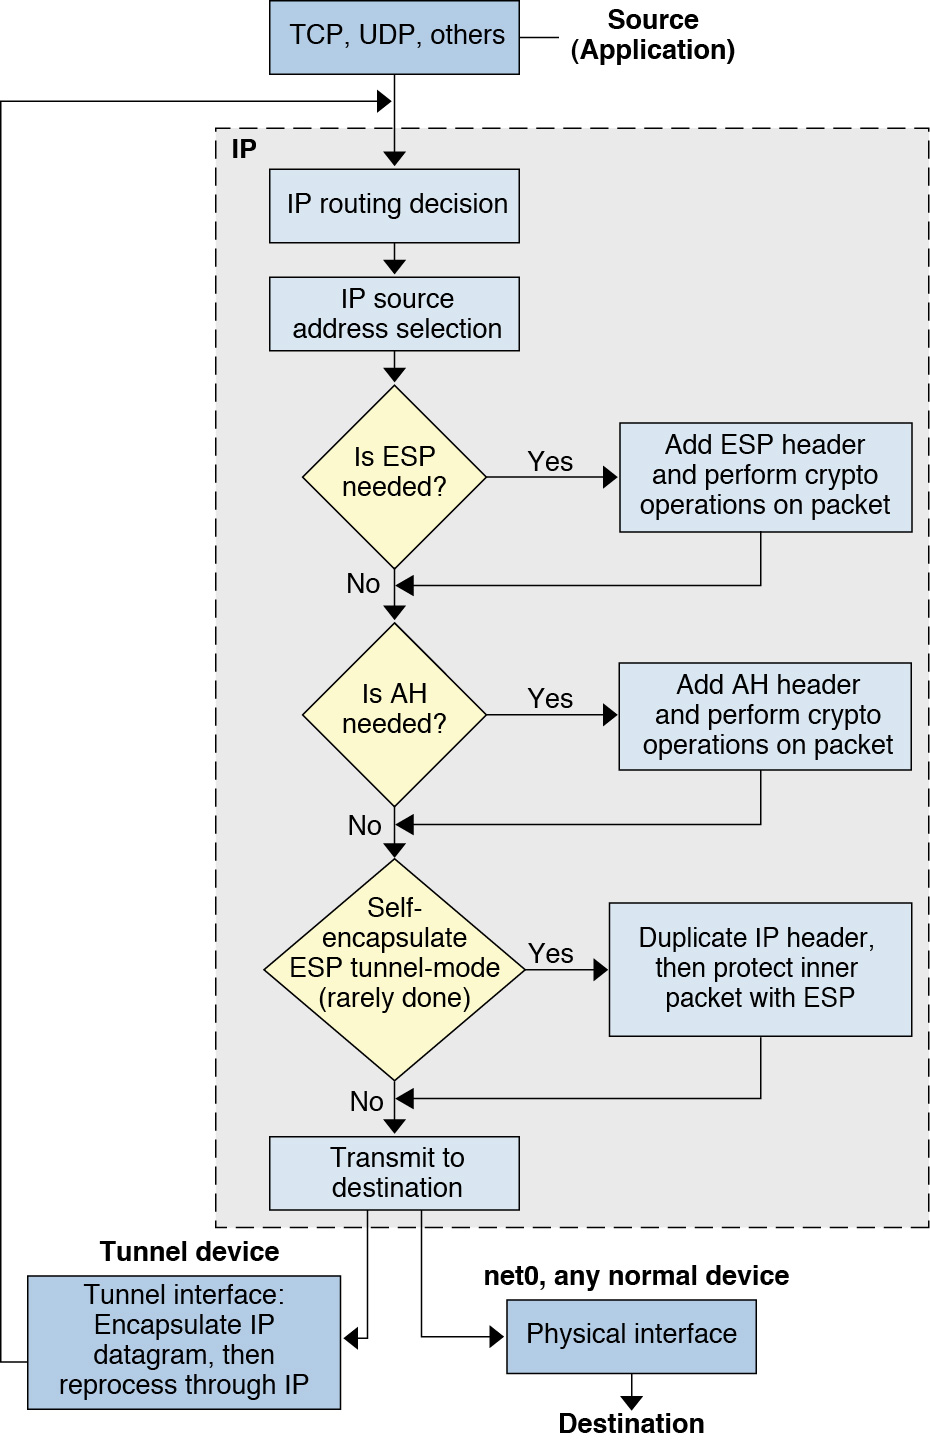 image:Flow diagram shows that the outbound packet is first protected by ESP, and then by AH. The packet then goes to a tunnel or a physical interface.